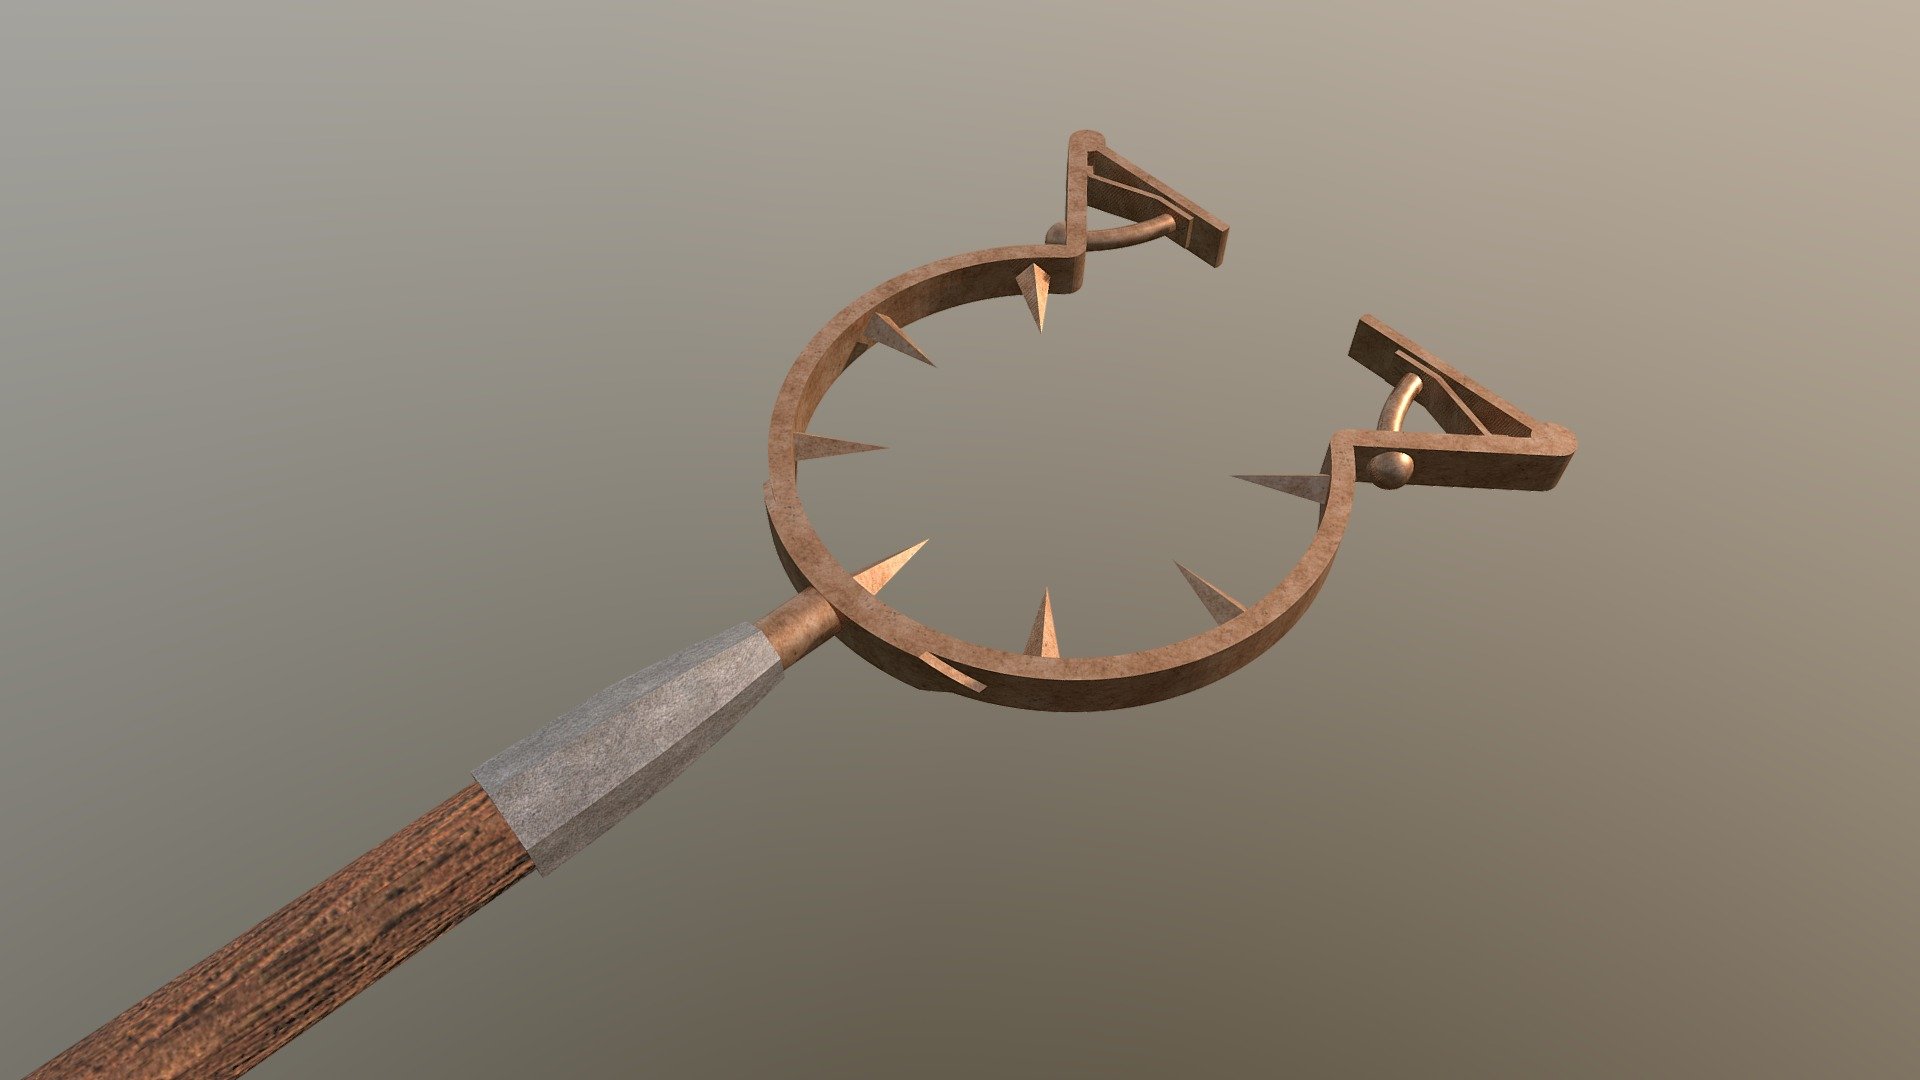 This is an obscure medieval weapon that was used to capture men or soldiers on and off the battlefield. I based the model of of a photo of an actual man catcher I found on wikipedia 3d model